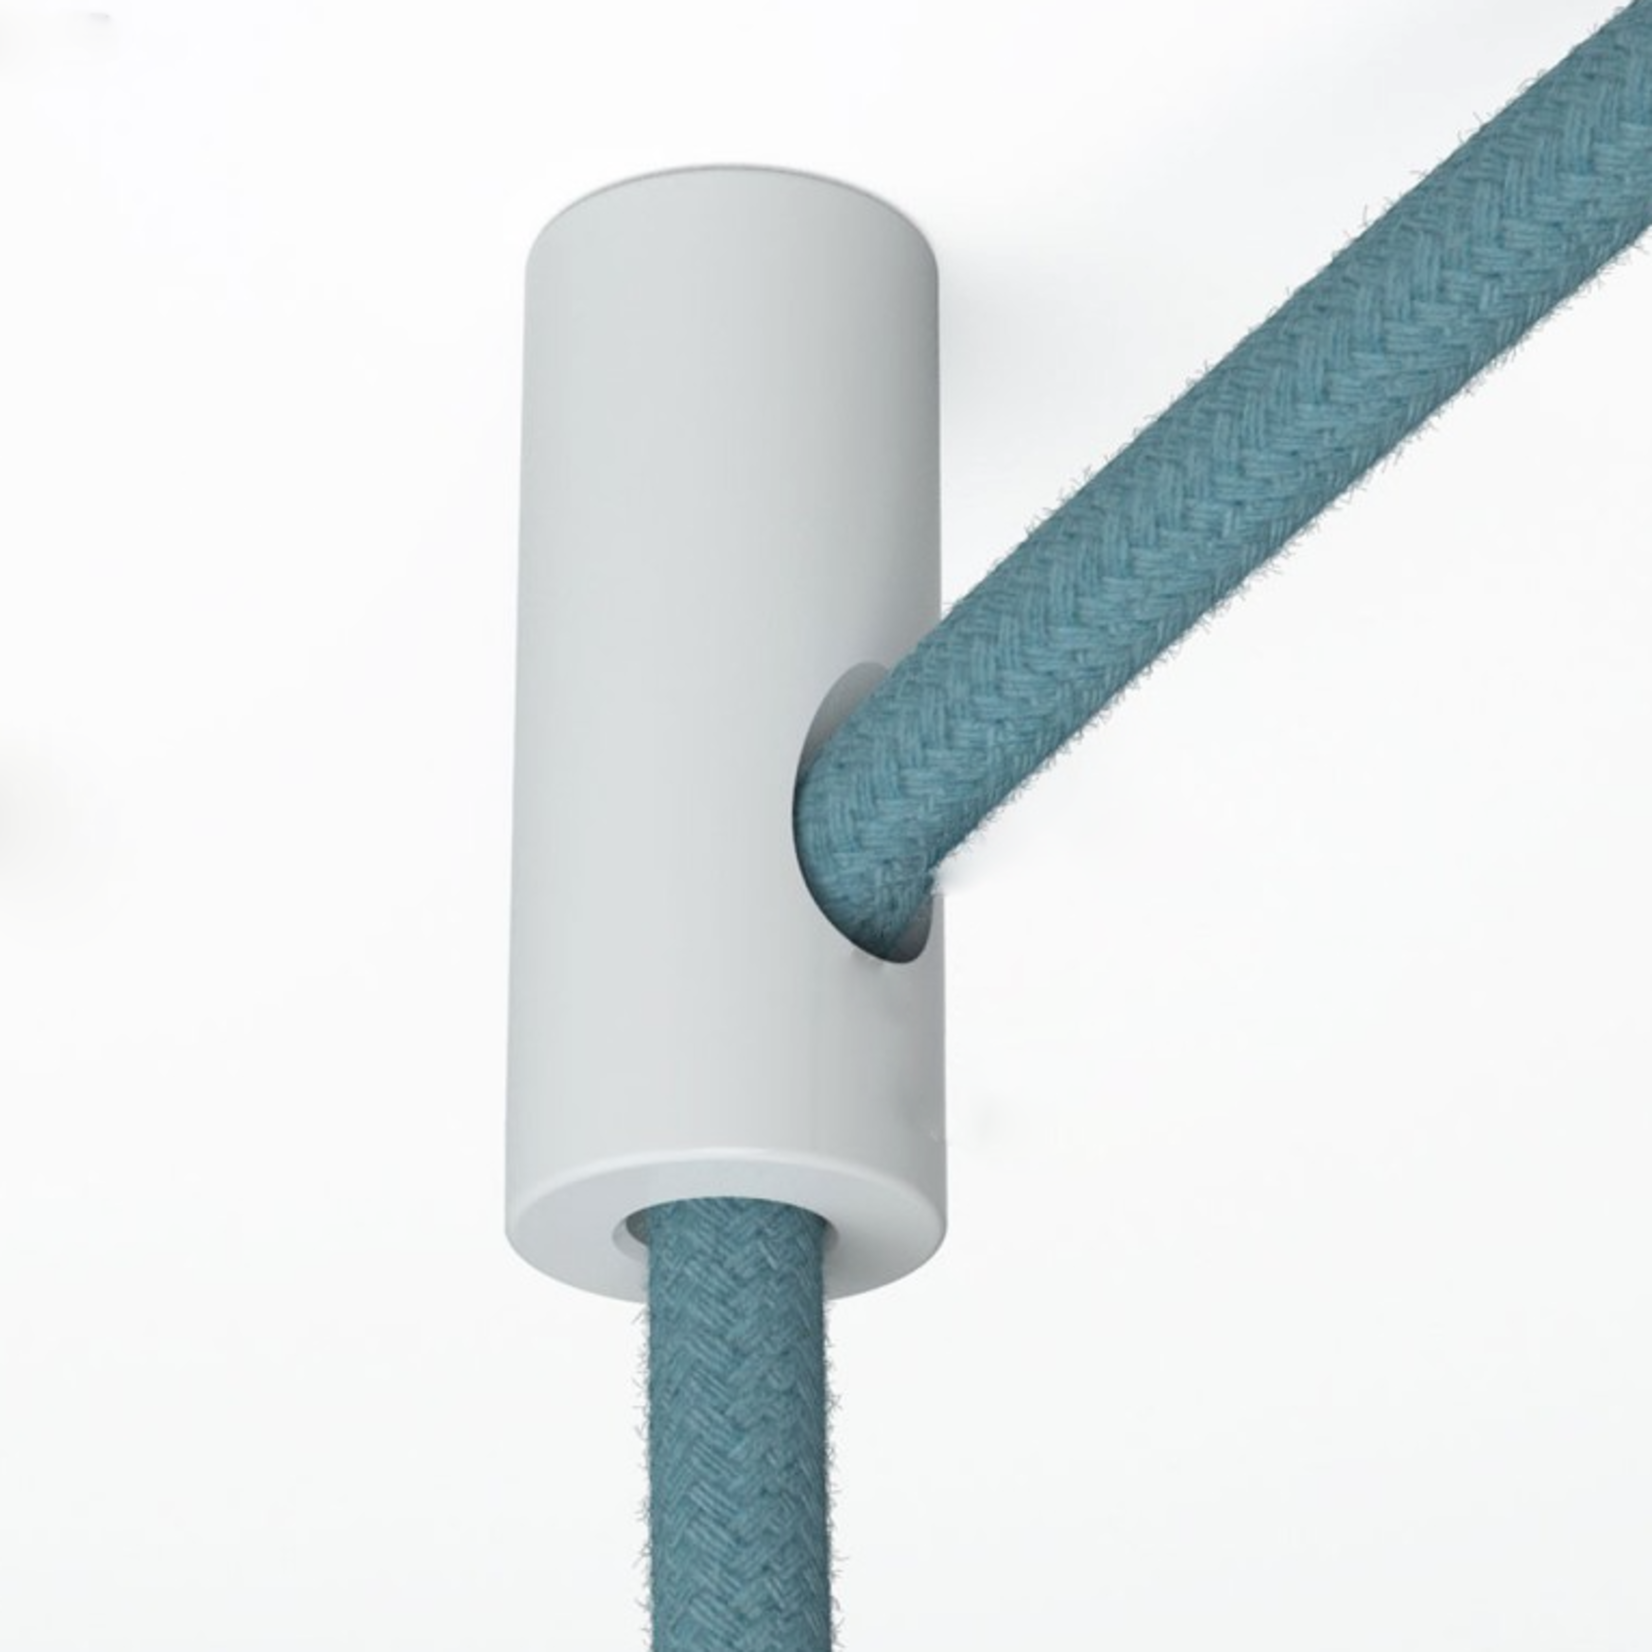 Cable Drop and Grip White Plastic ceiling hook and stop fabric